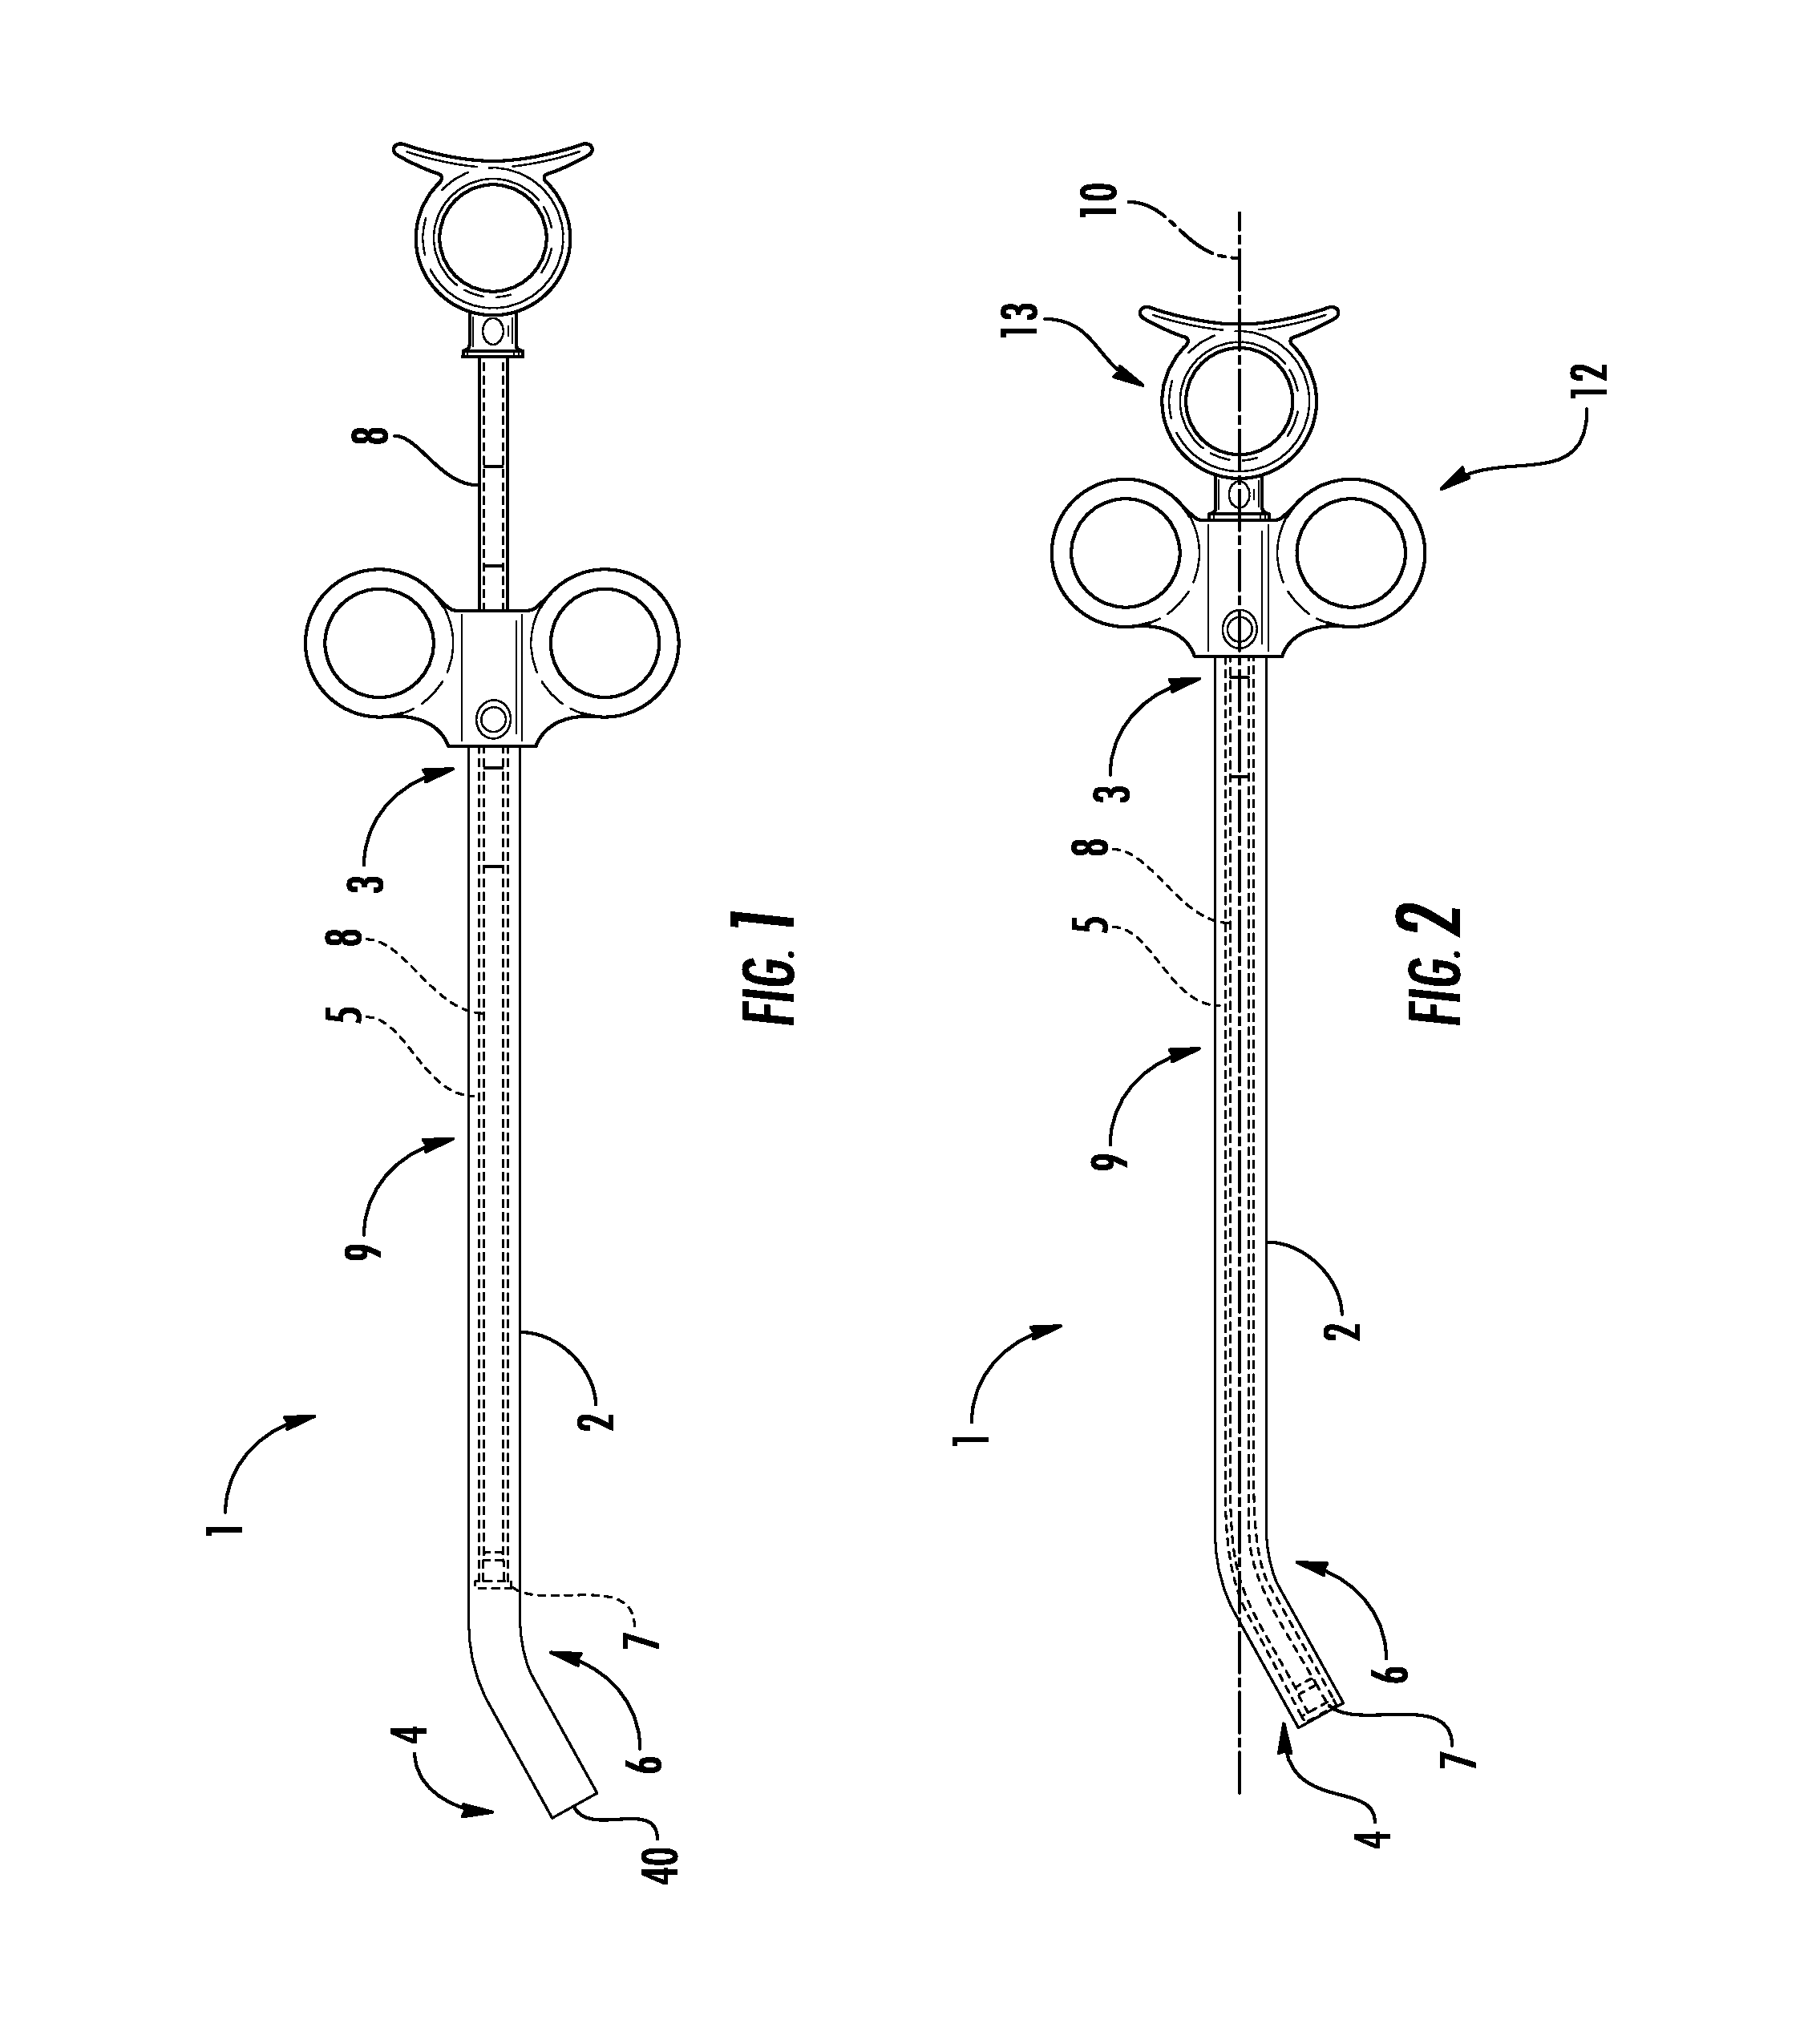 Injector device for introducing biocompatible material into deep anatomical areas